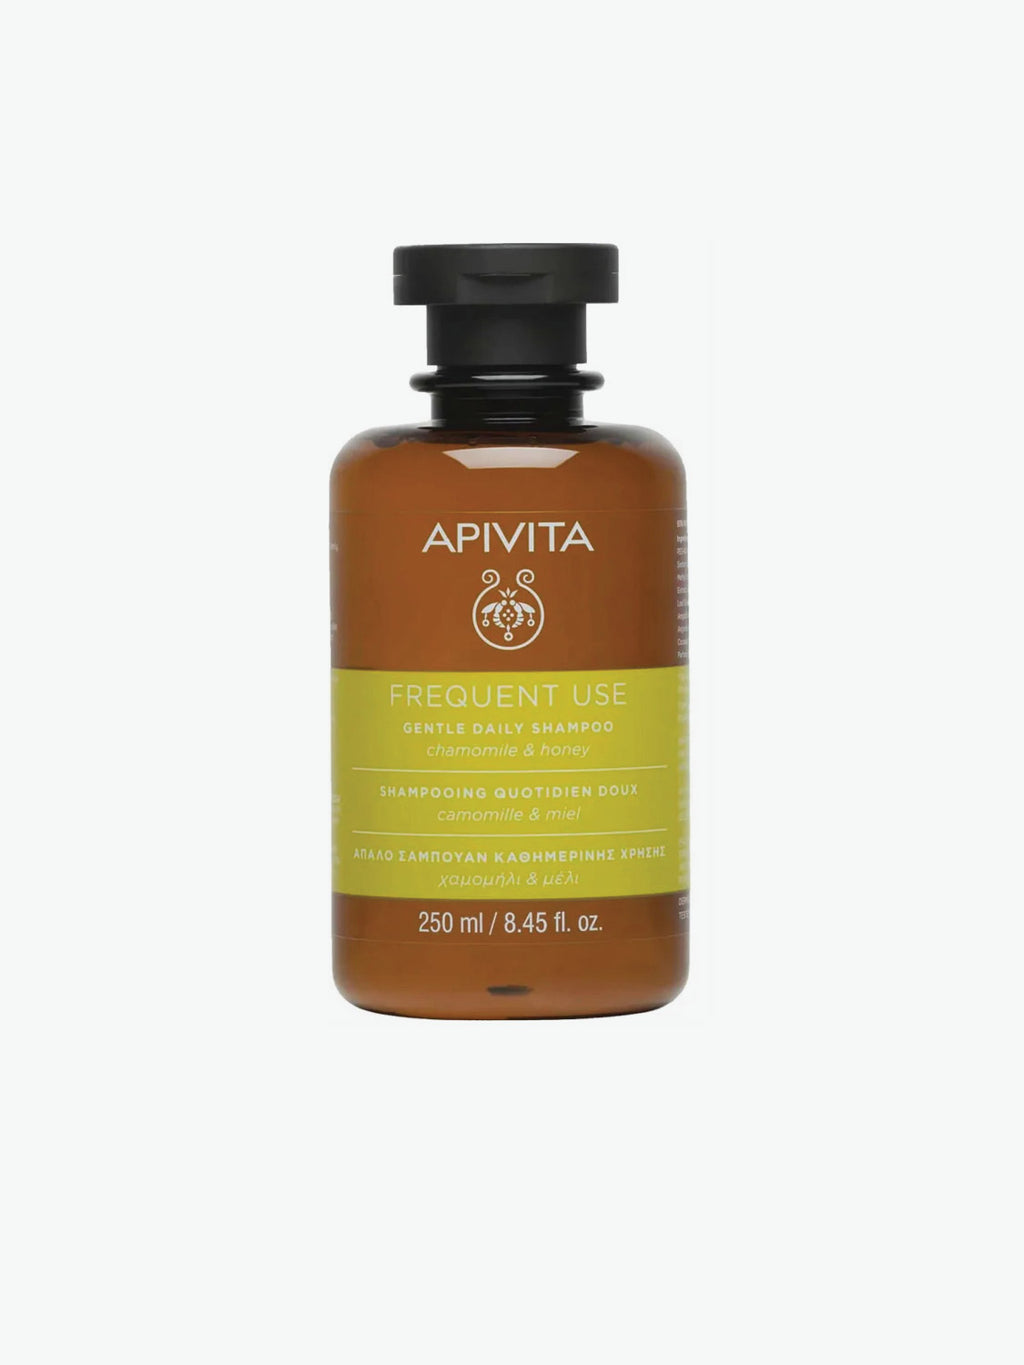 Apivita Frequent Use Gentle Daily Shampoo | A